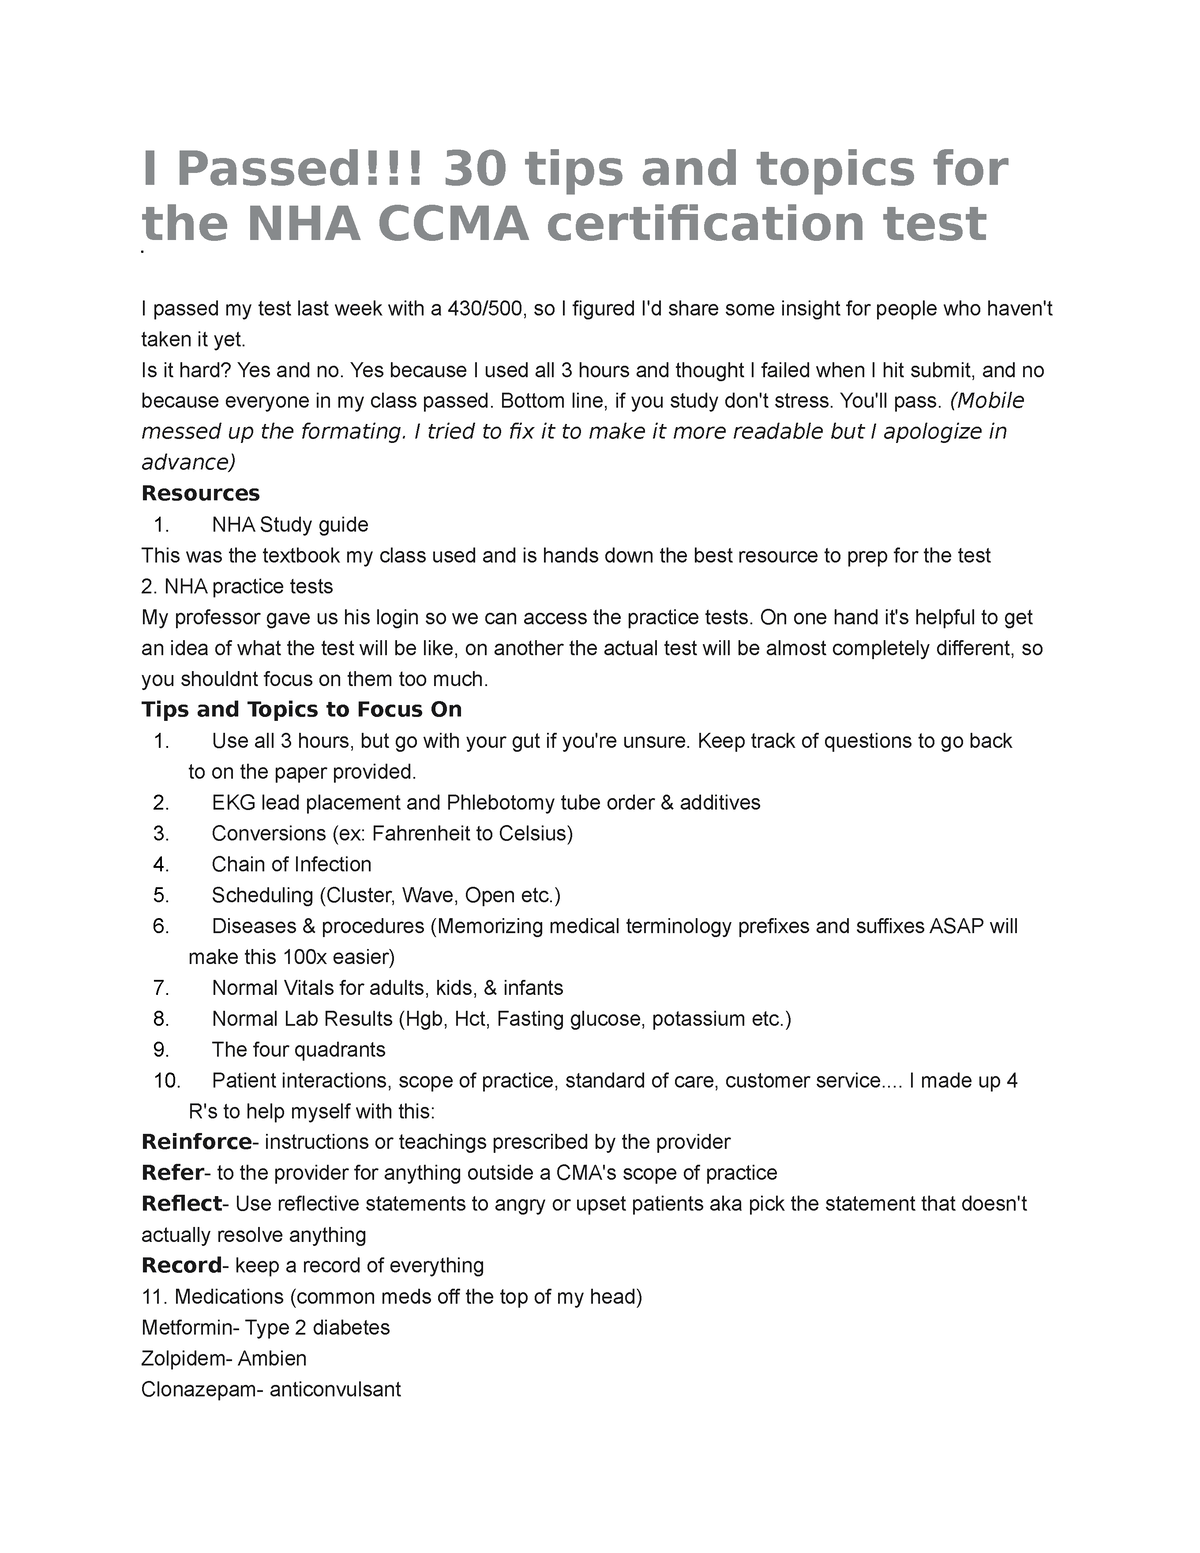 Pass CCMA practice test questions I Passed!!! 30 tips and topics